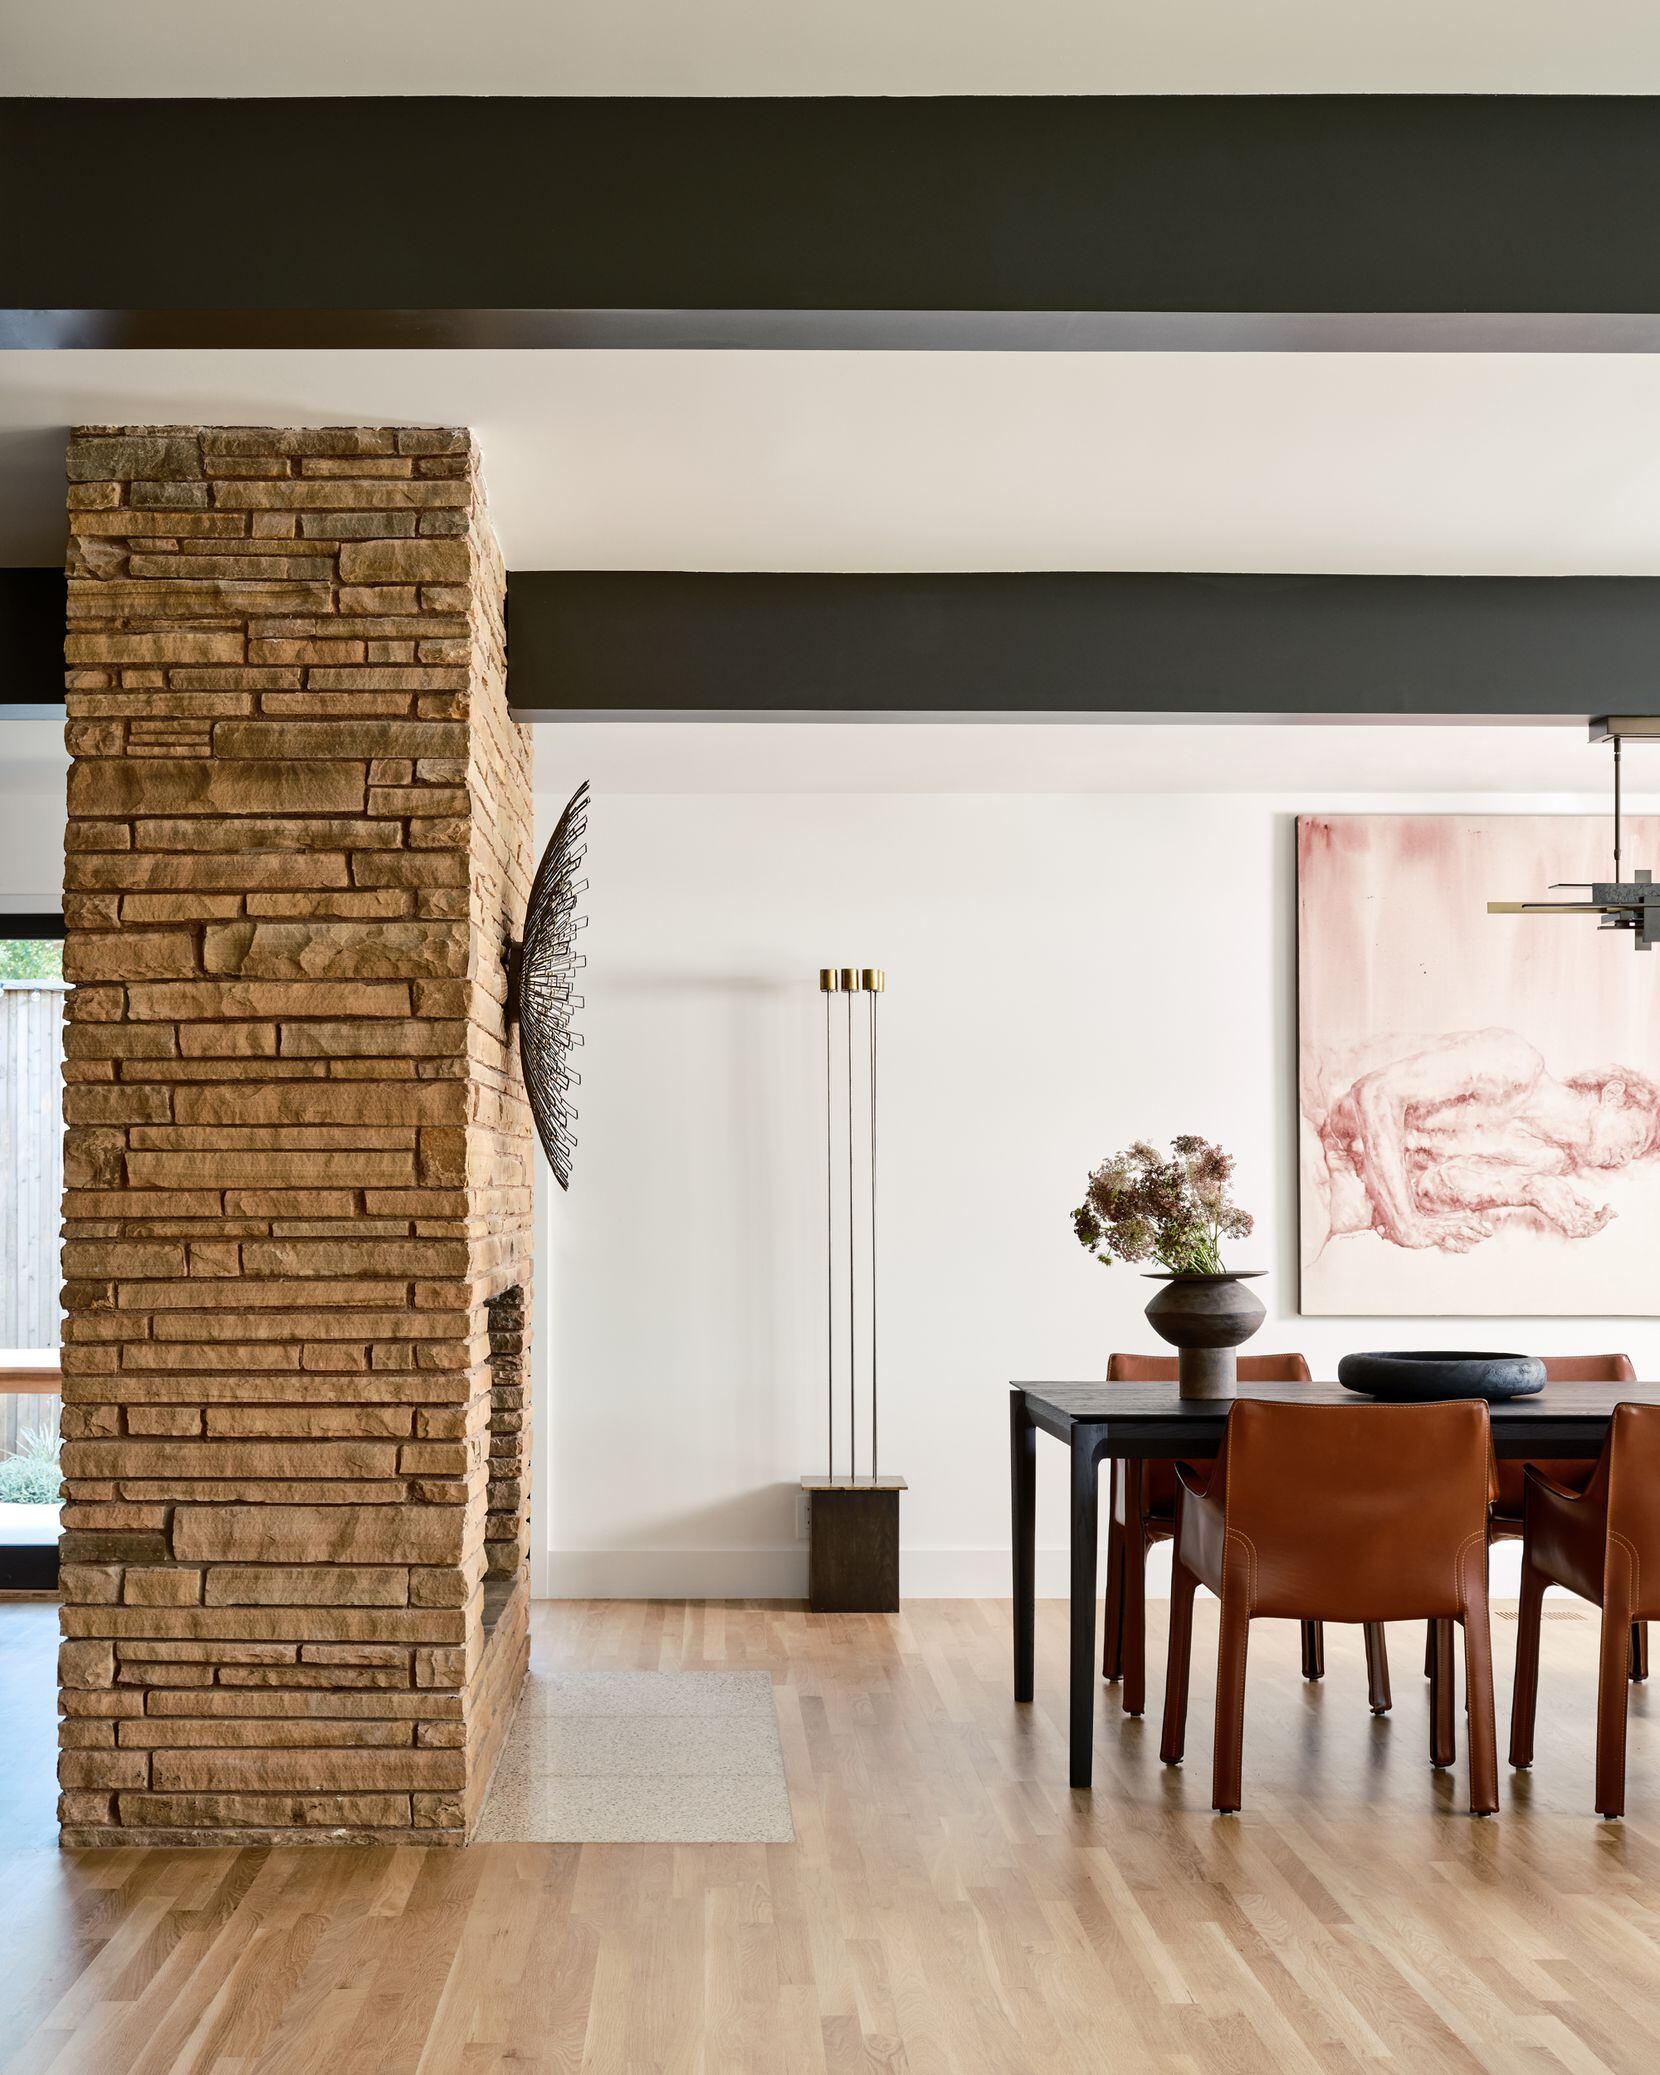 An original brick fireplace separates the dining room from the kitchen.